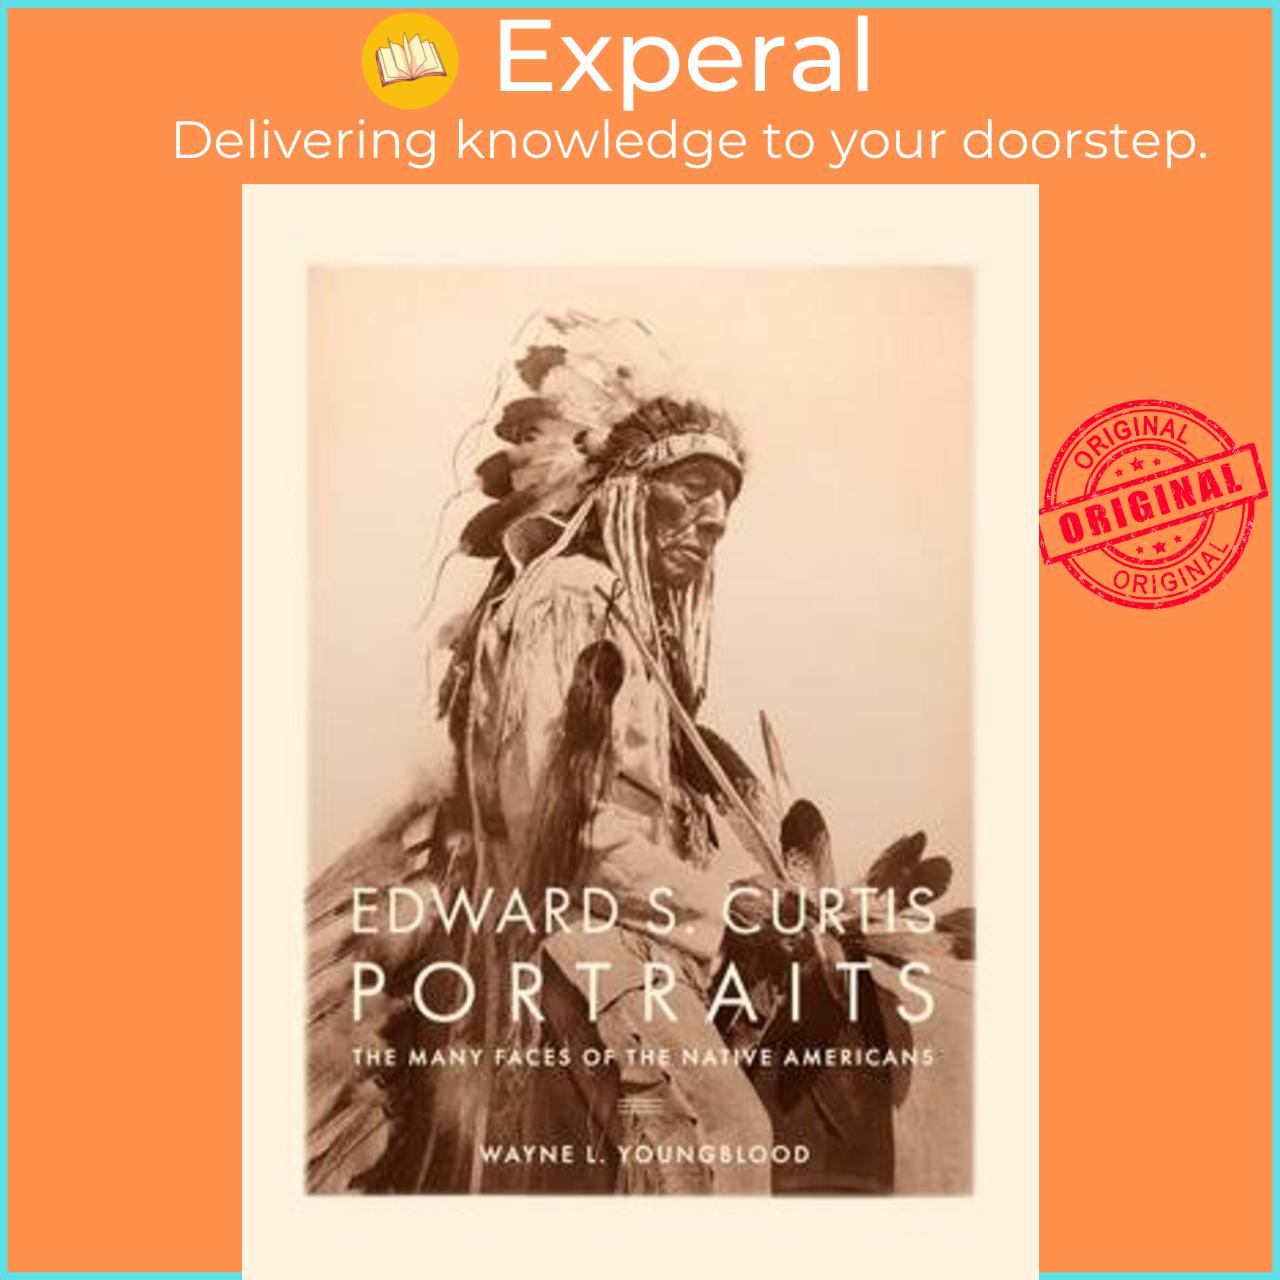 Hình ảnh Sách - Edward S. Curtis Portraits - The Many Faces of the Native American by Wayne Youngblood (US edition, hardcover)